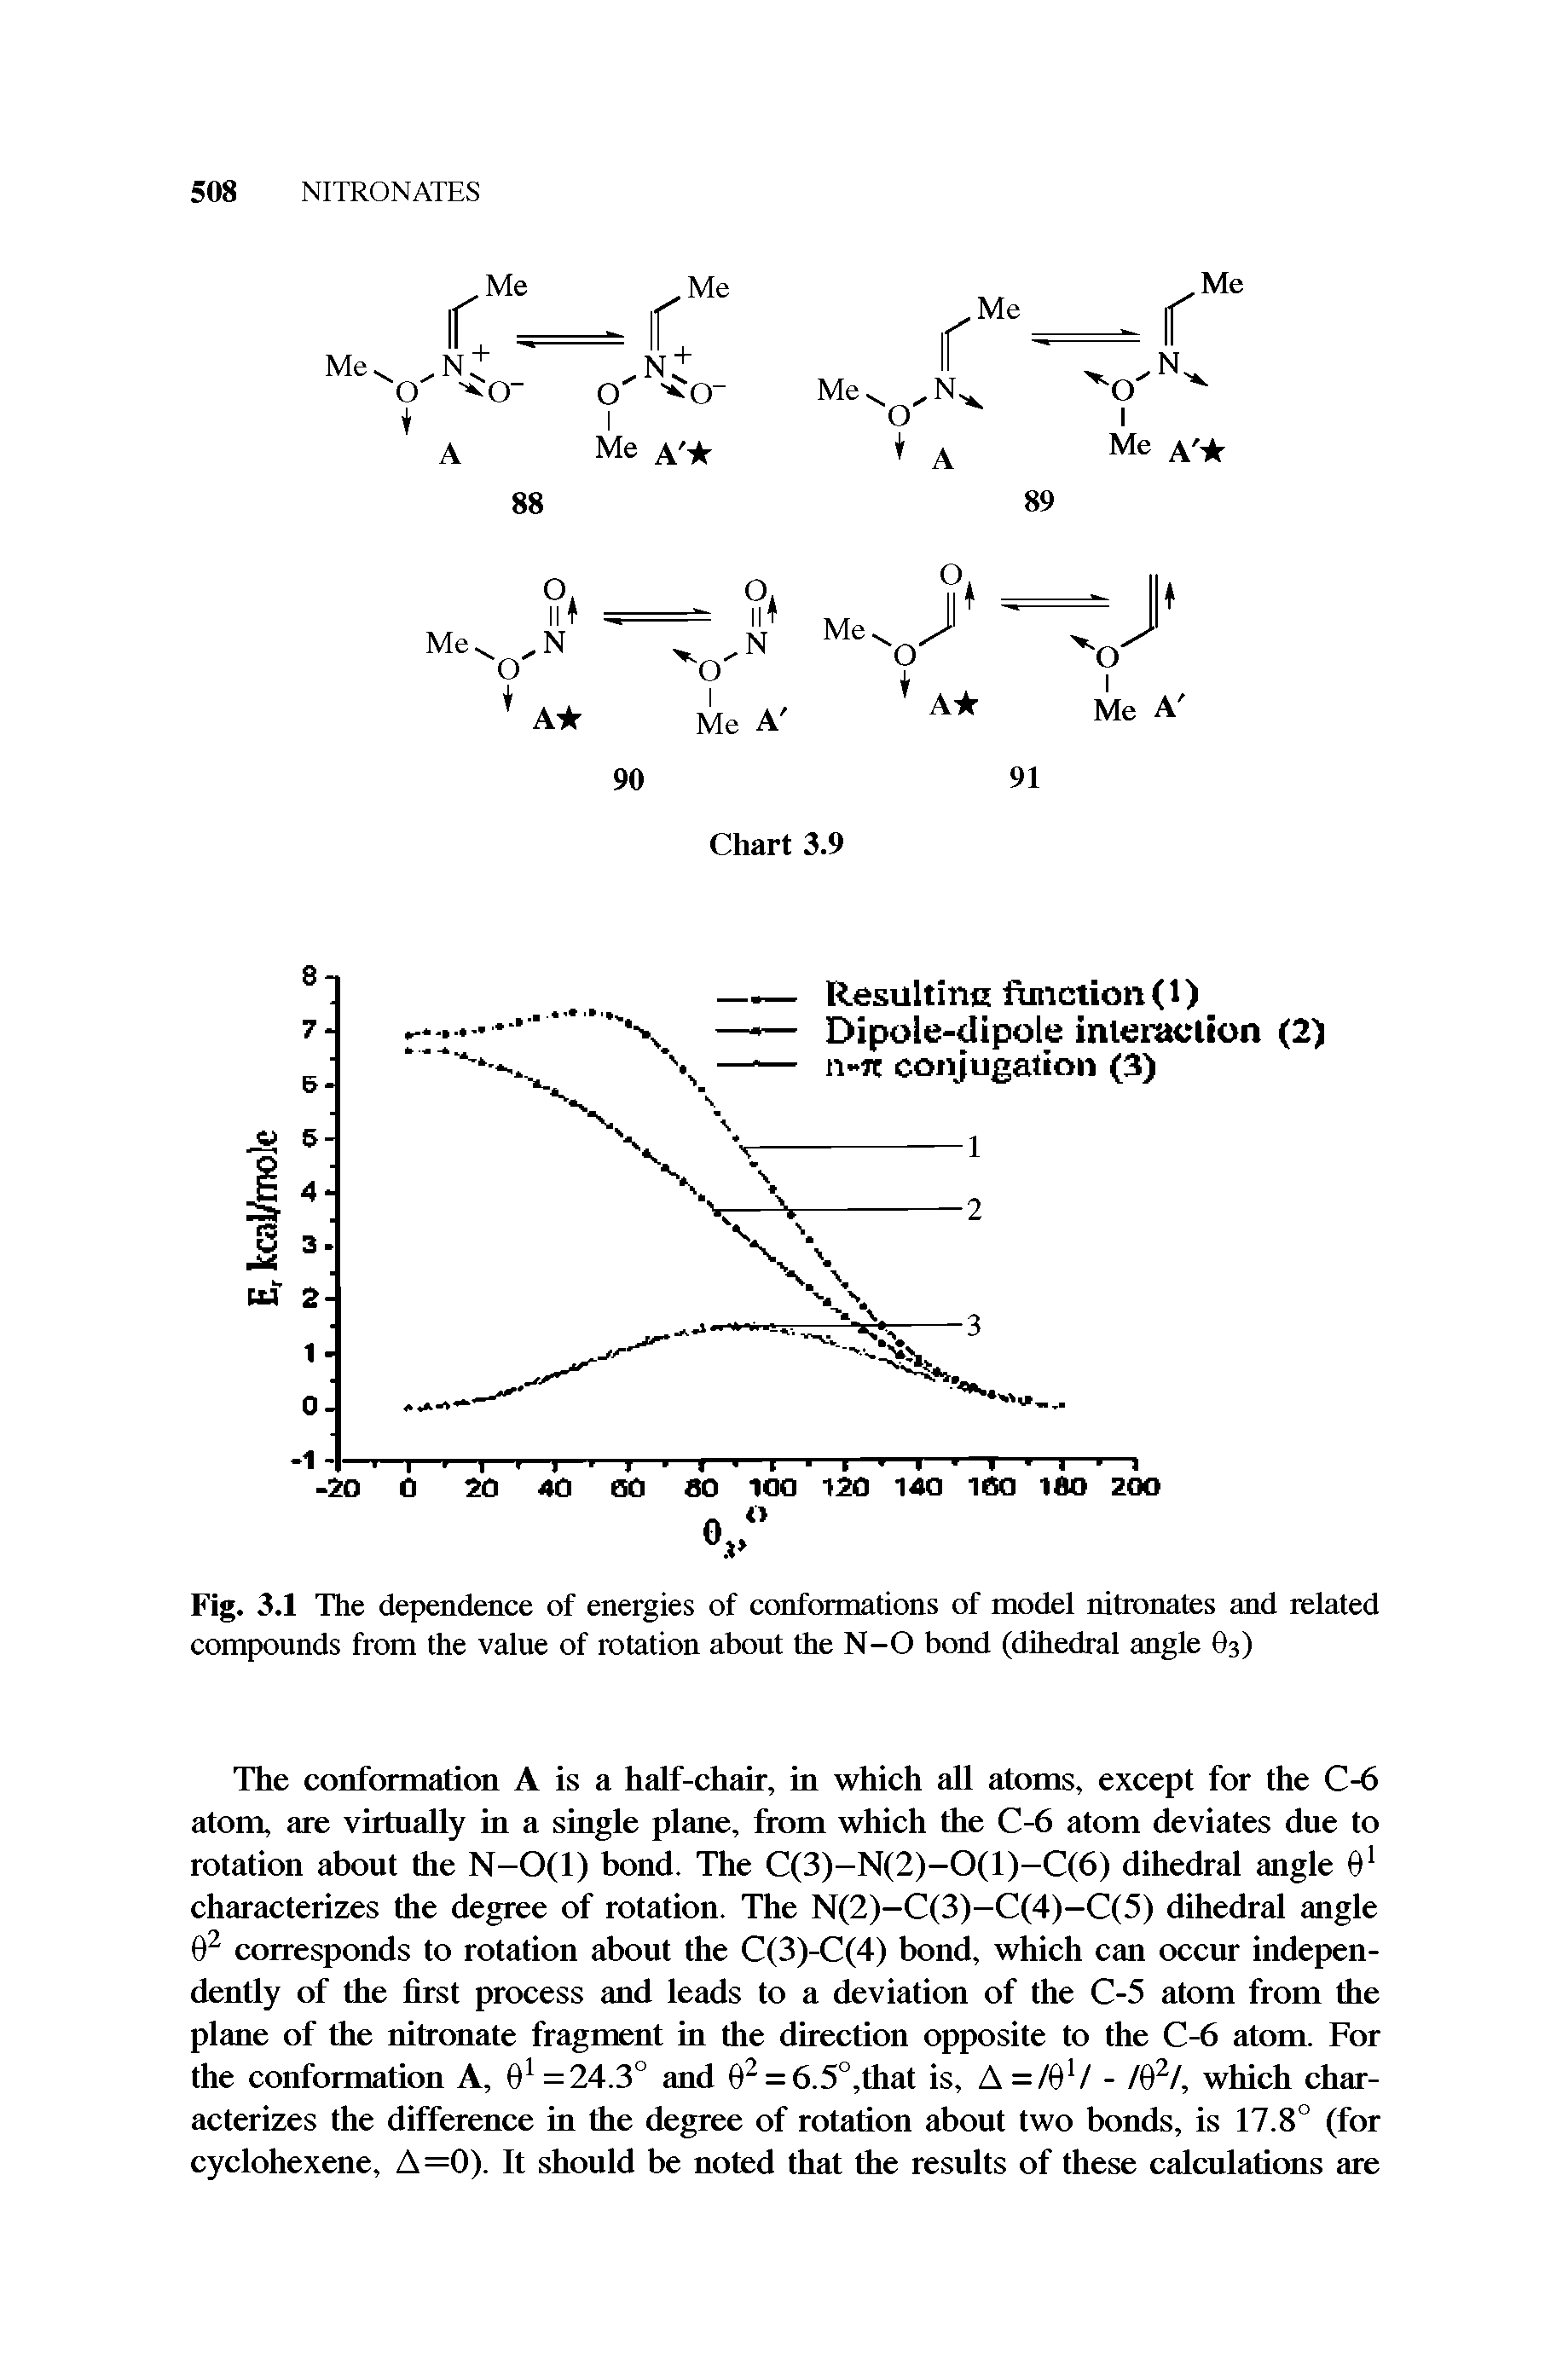 Fig. 3.1 The dependence of energies of conformations of model nitronates and related compounds from the value of rotation about the N-O bond (dihedral angle O3)...